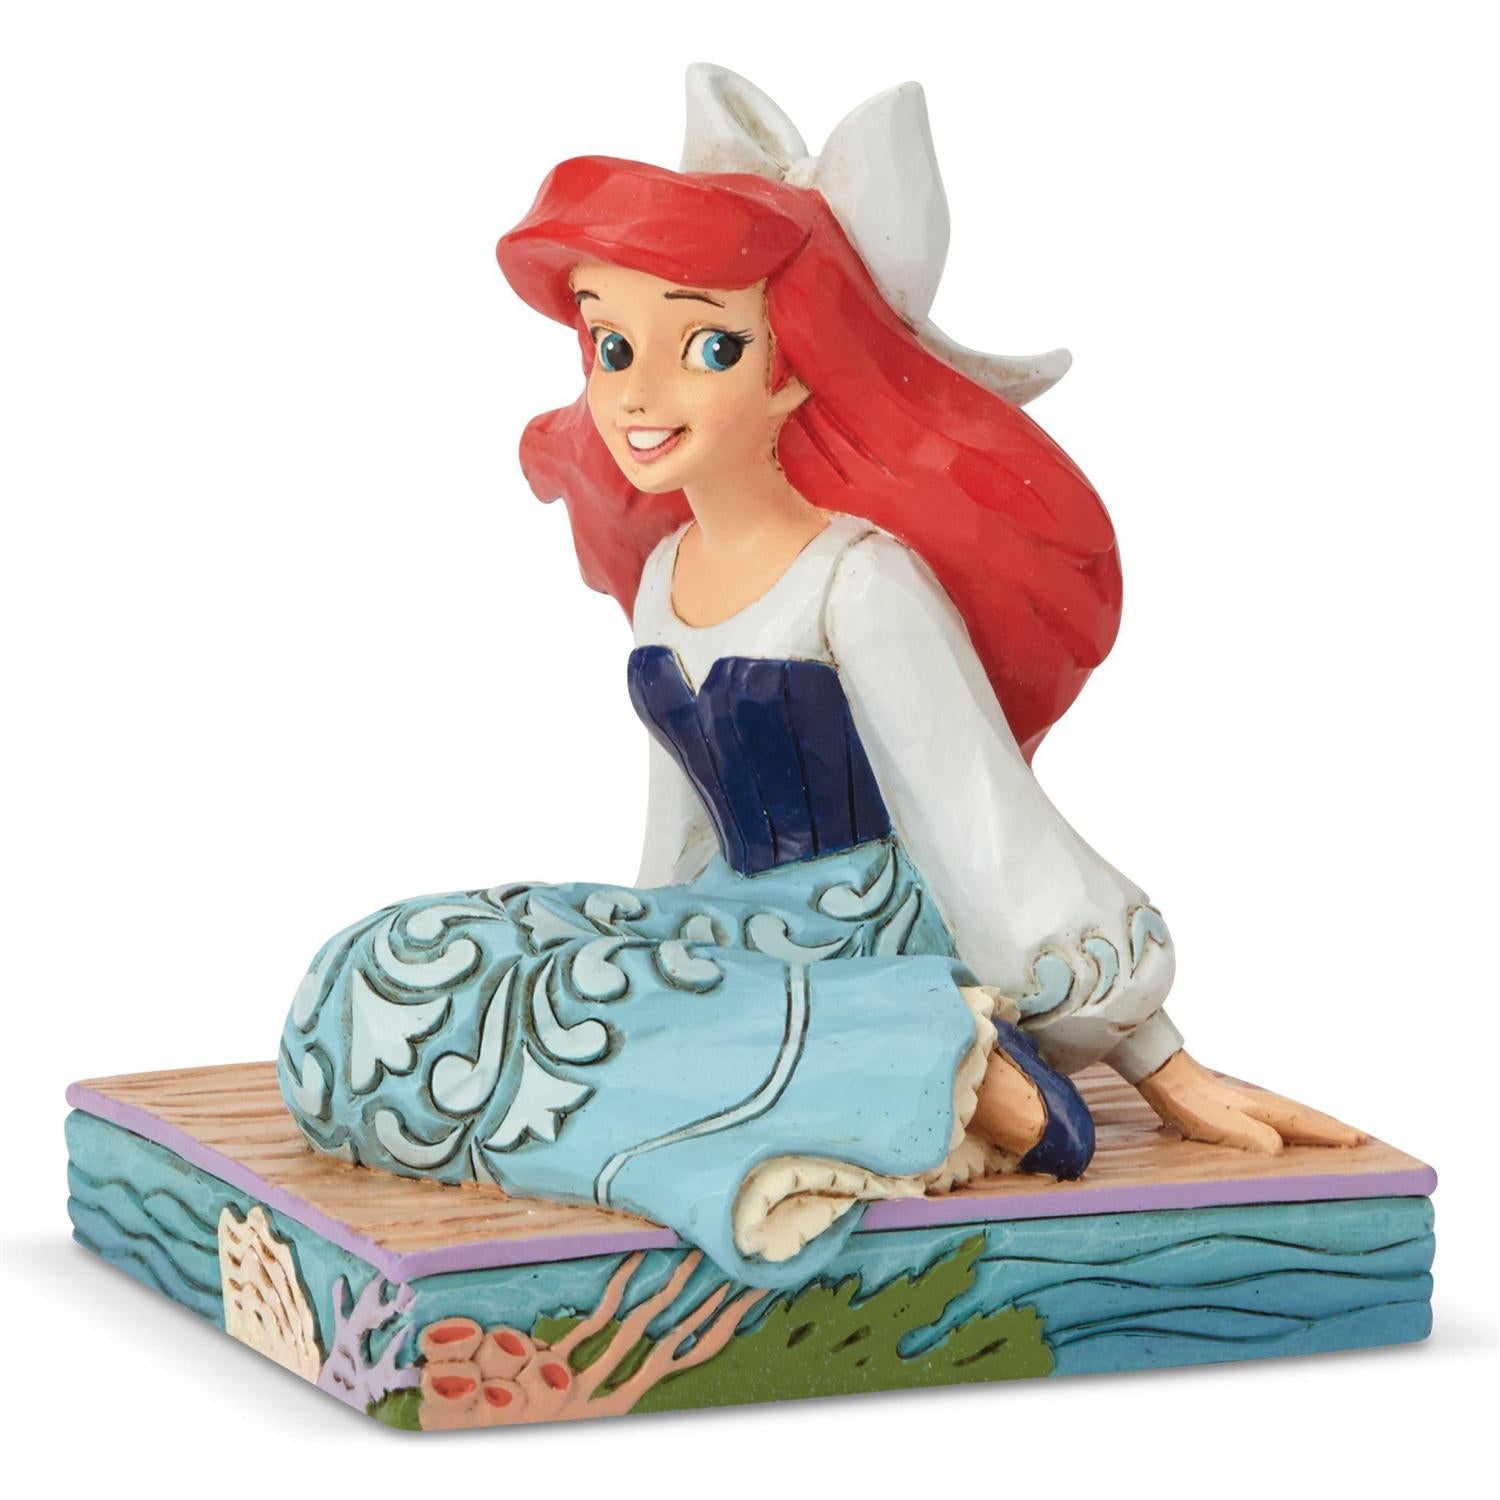 Be Bold Little Mermaid - Lake Norman Gifts